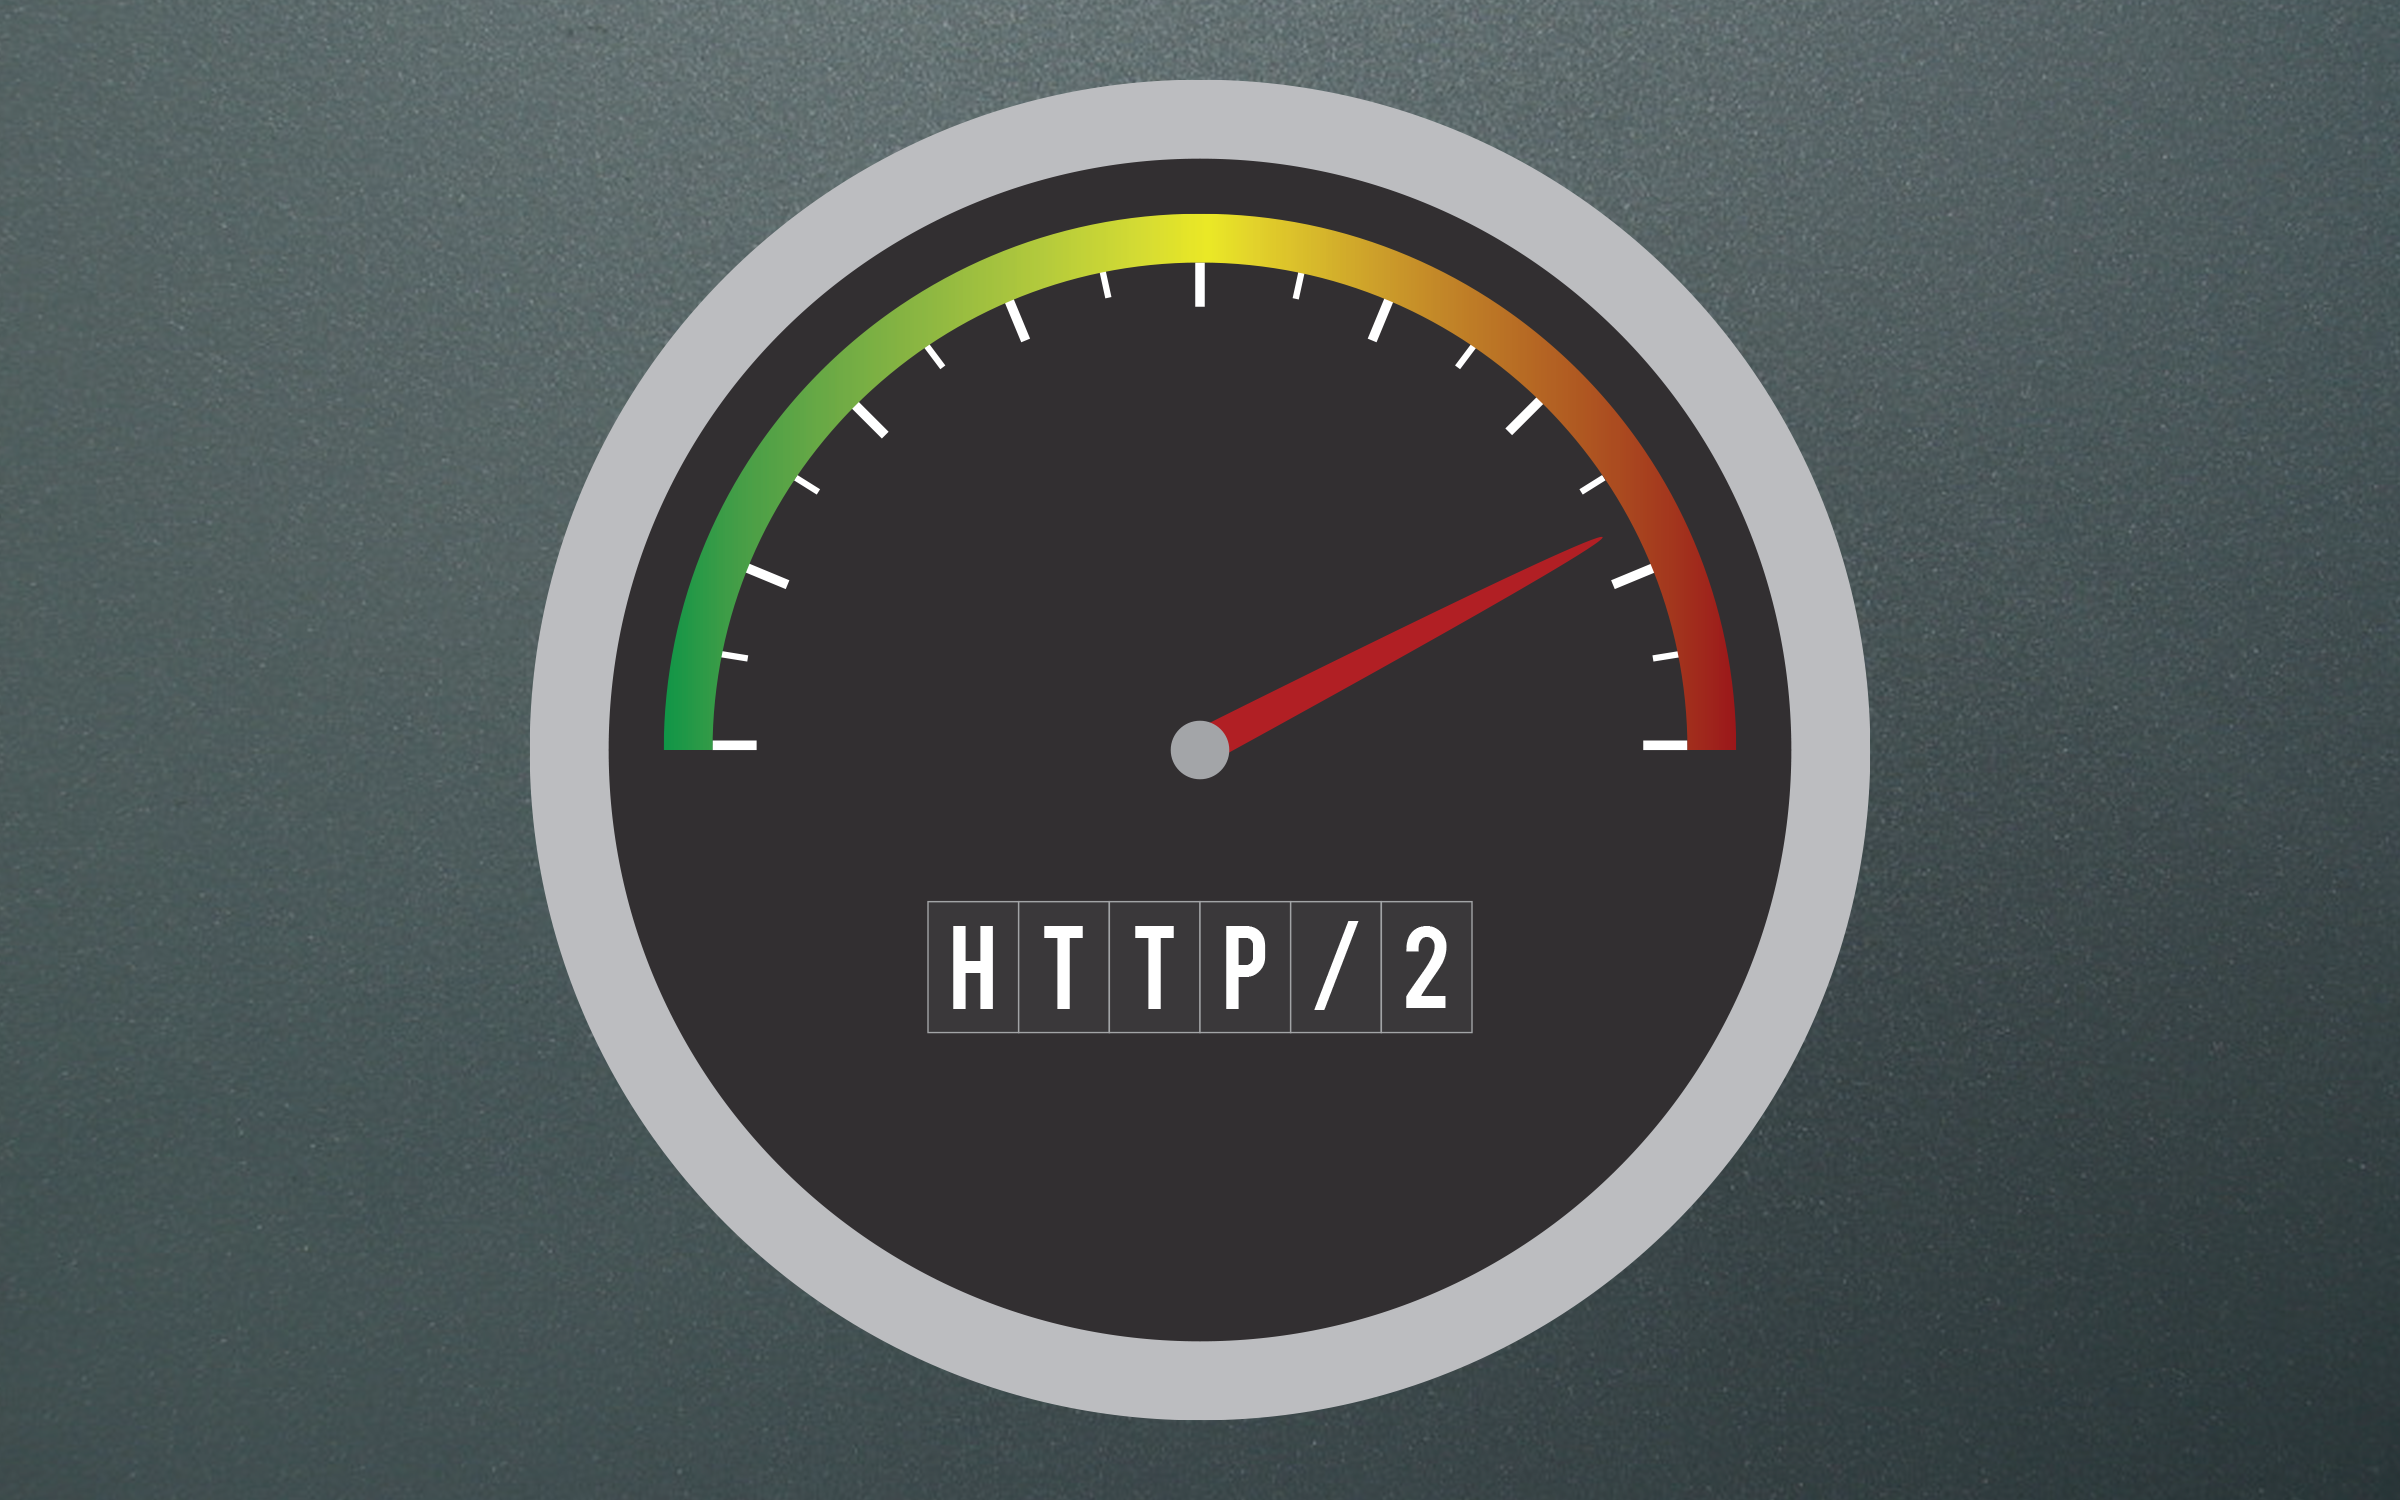 The Internet Gets a Speed Boost with HTTP/2